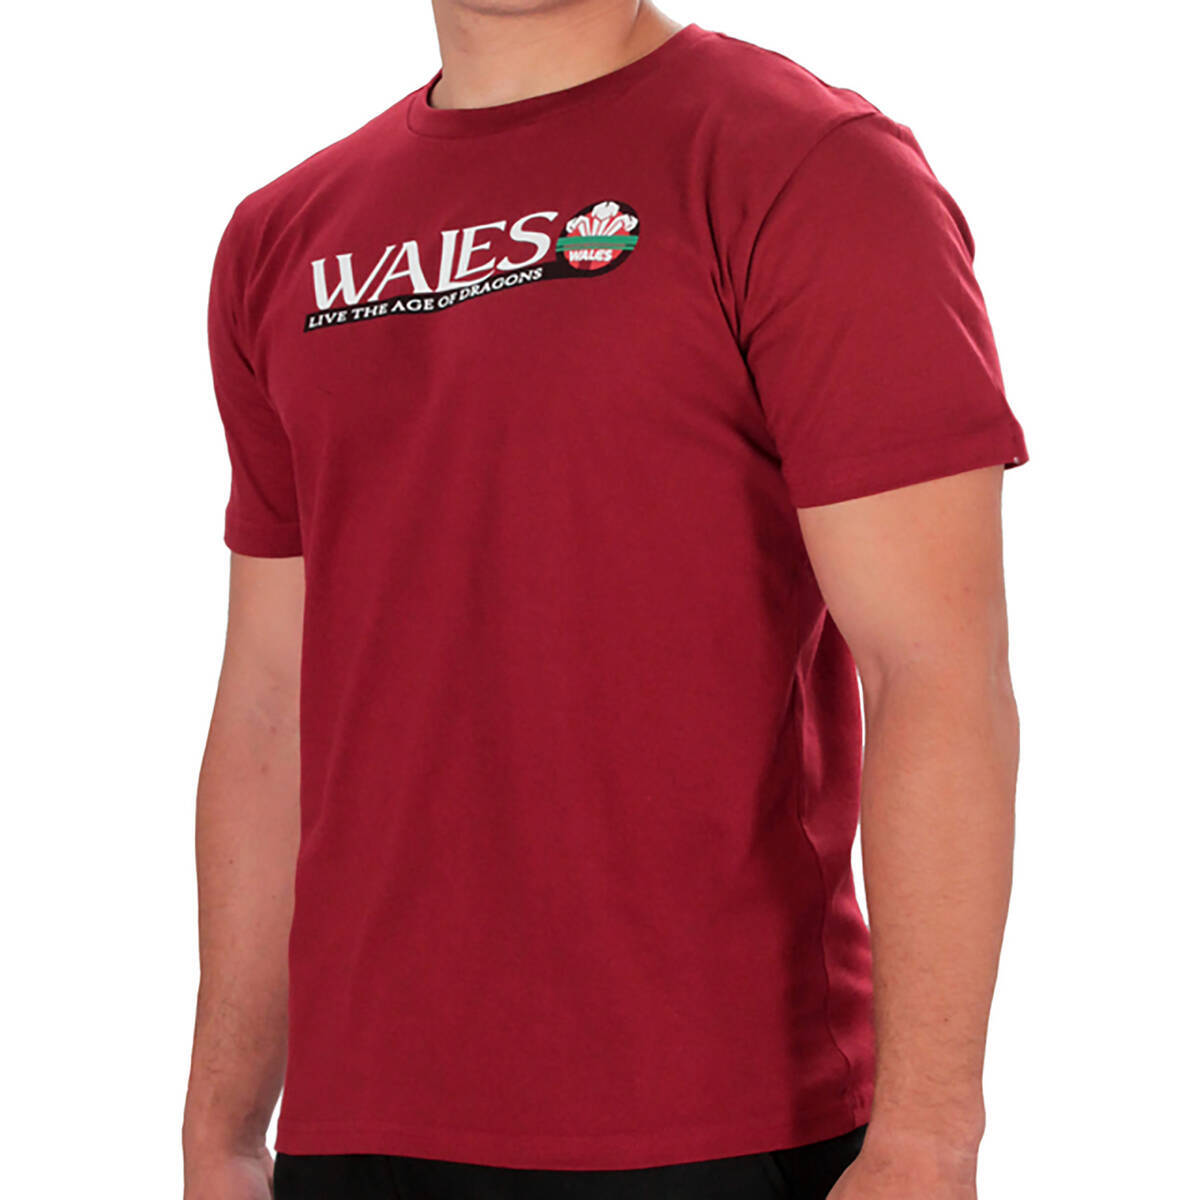 Imagen carrousel Remera Wales Live the Ages of Dragons 1